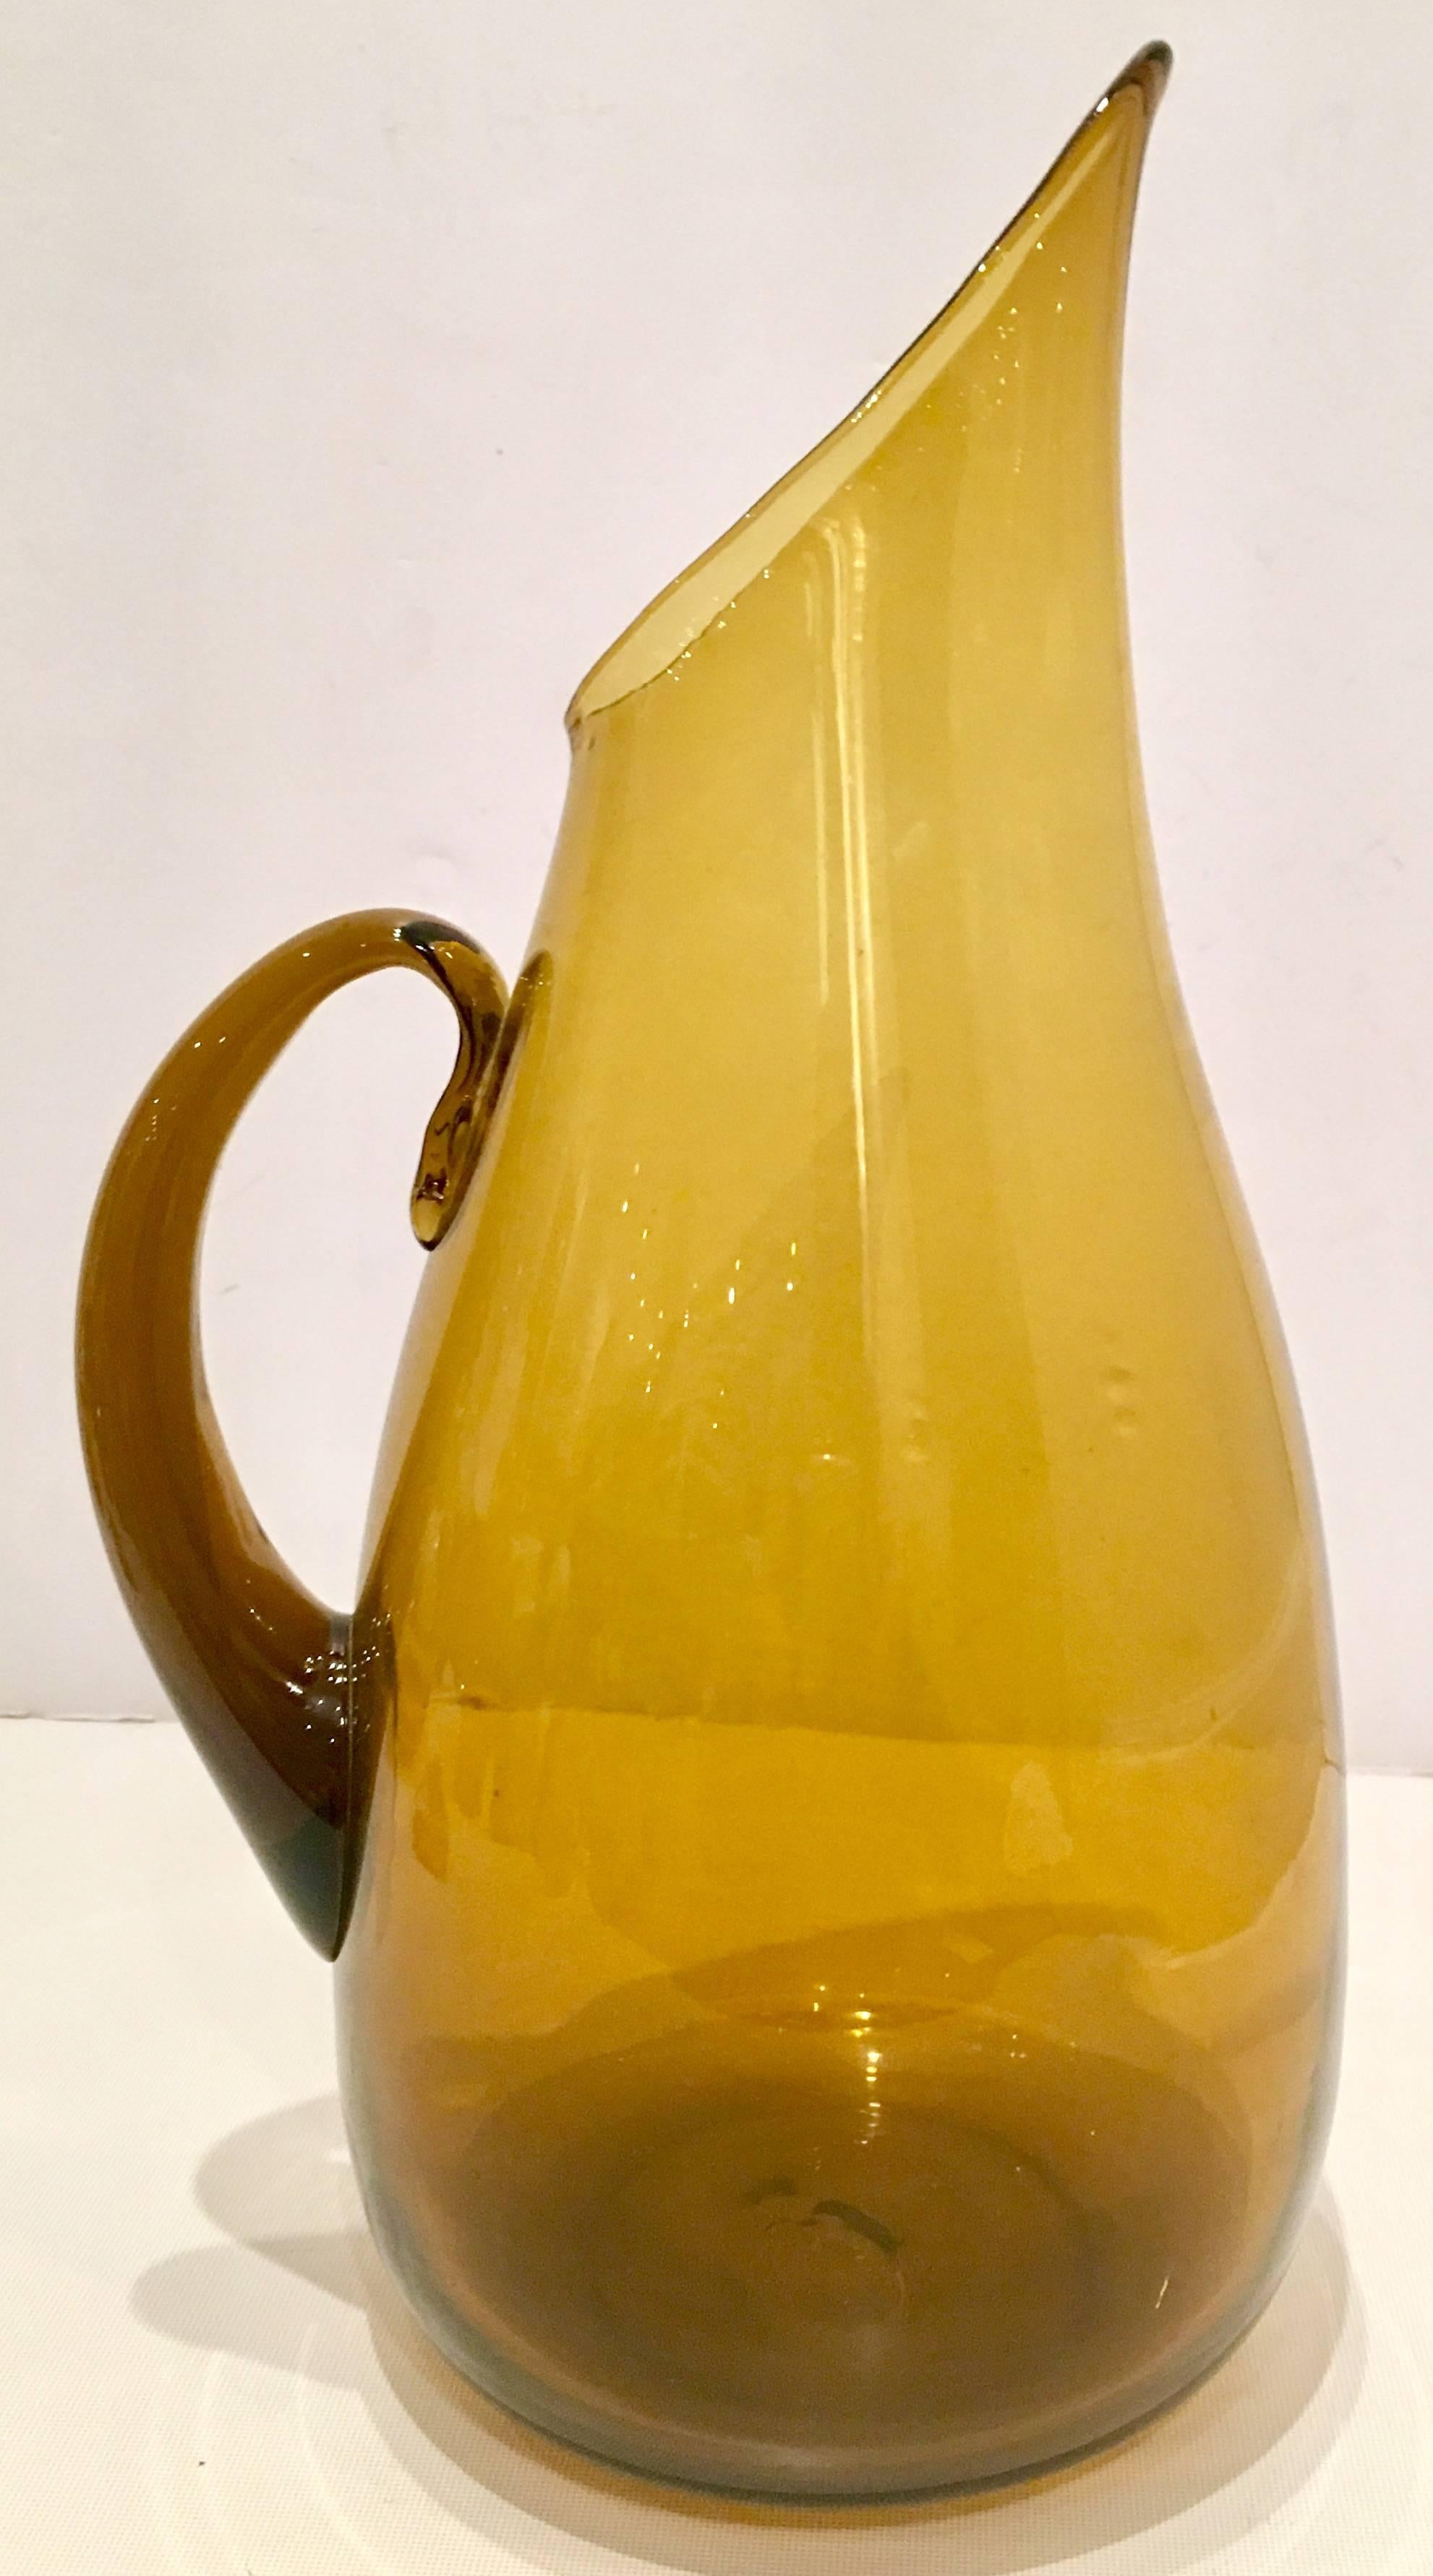 Mid-Century Modern Blenko glass amber applied handle, pointy spout large pitcher. This timeless modern shaped pitcher was designed by in house Blenko glass designer, Winslow Anderson during, 1947-1953.